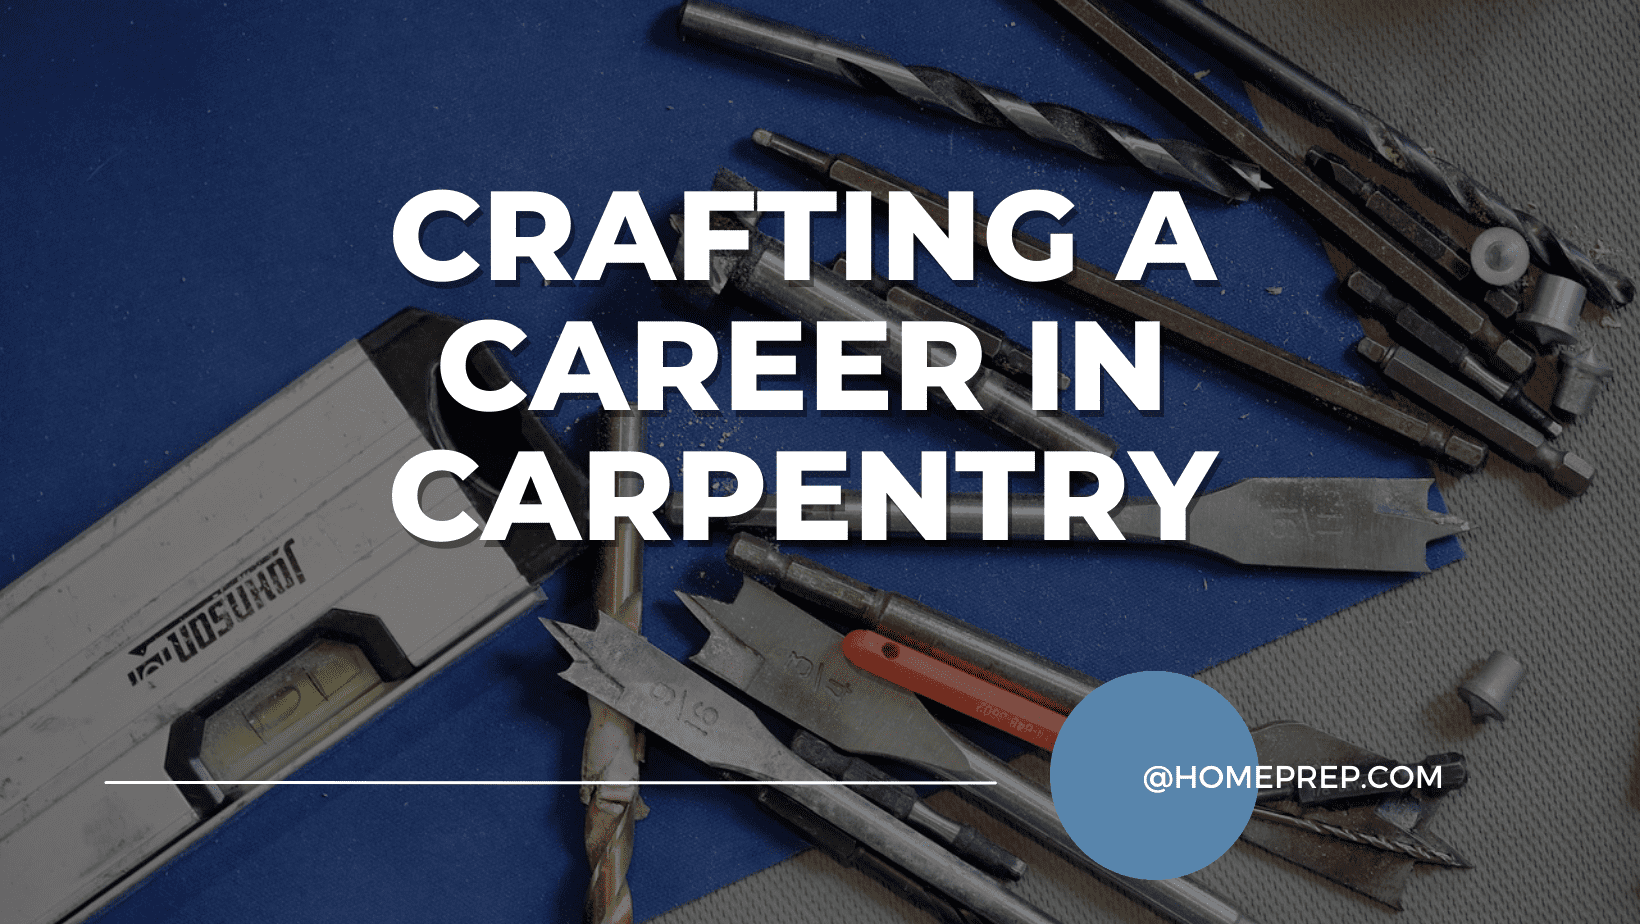 Crafting a Career in Carpentry